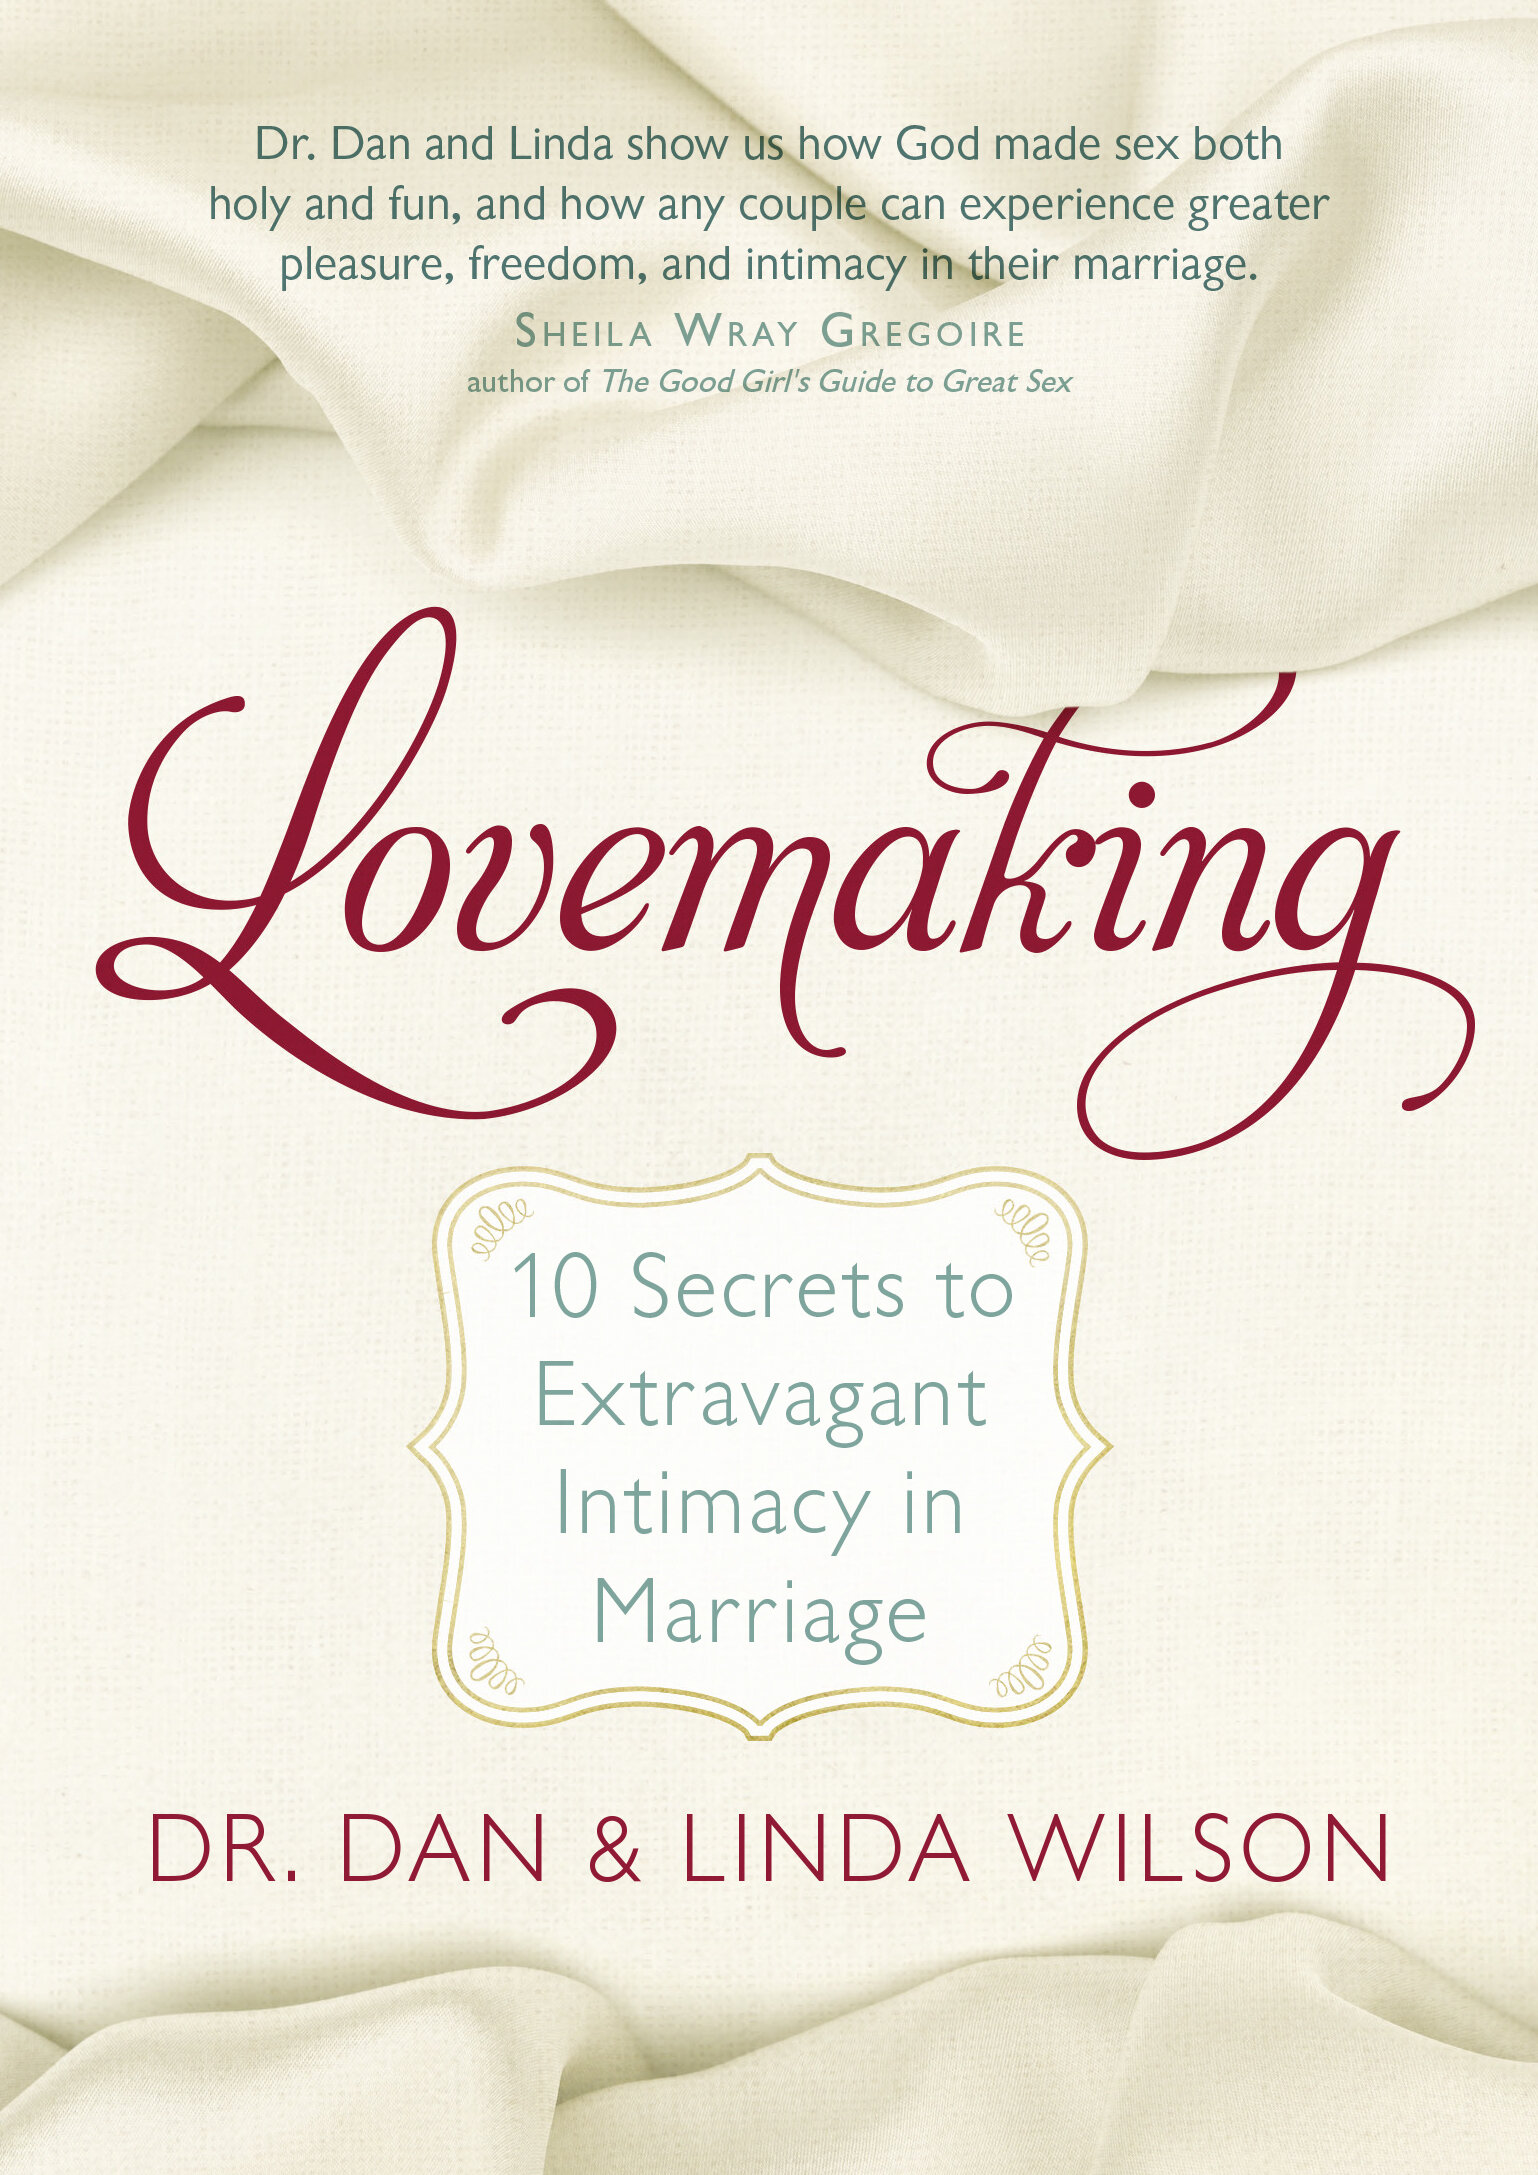 Lovemaking 10 Secrets to Extravagant Intimacy in Marriage Logos Bible Software picture